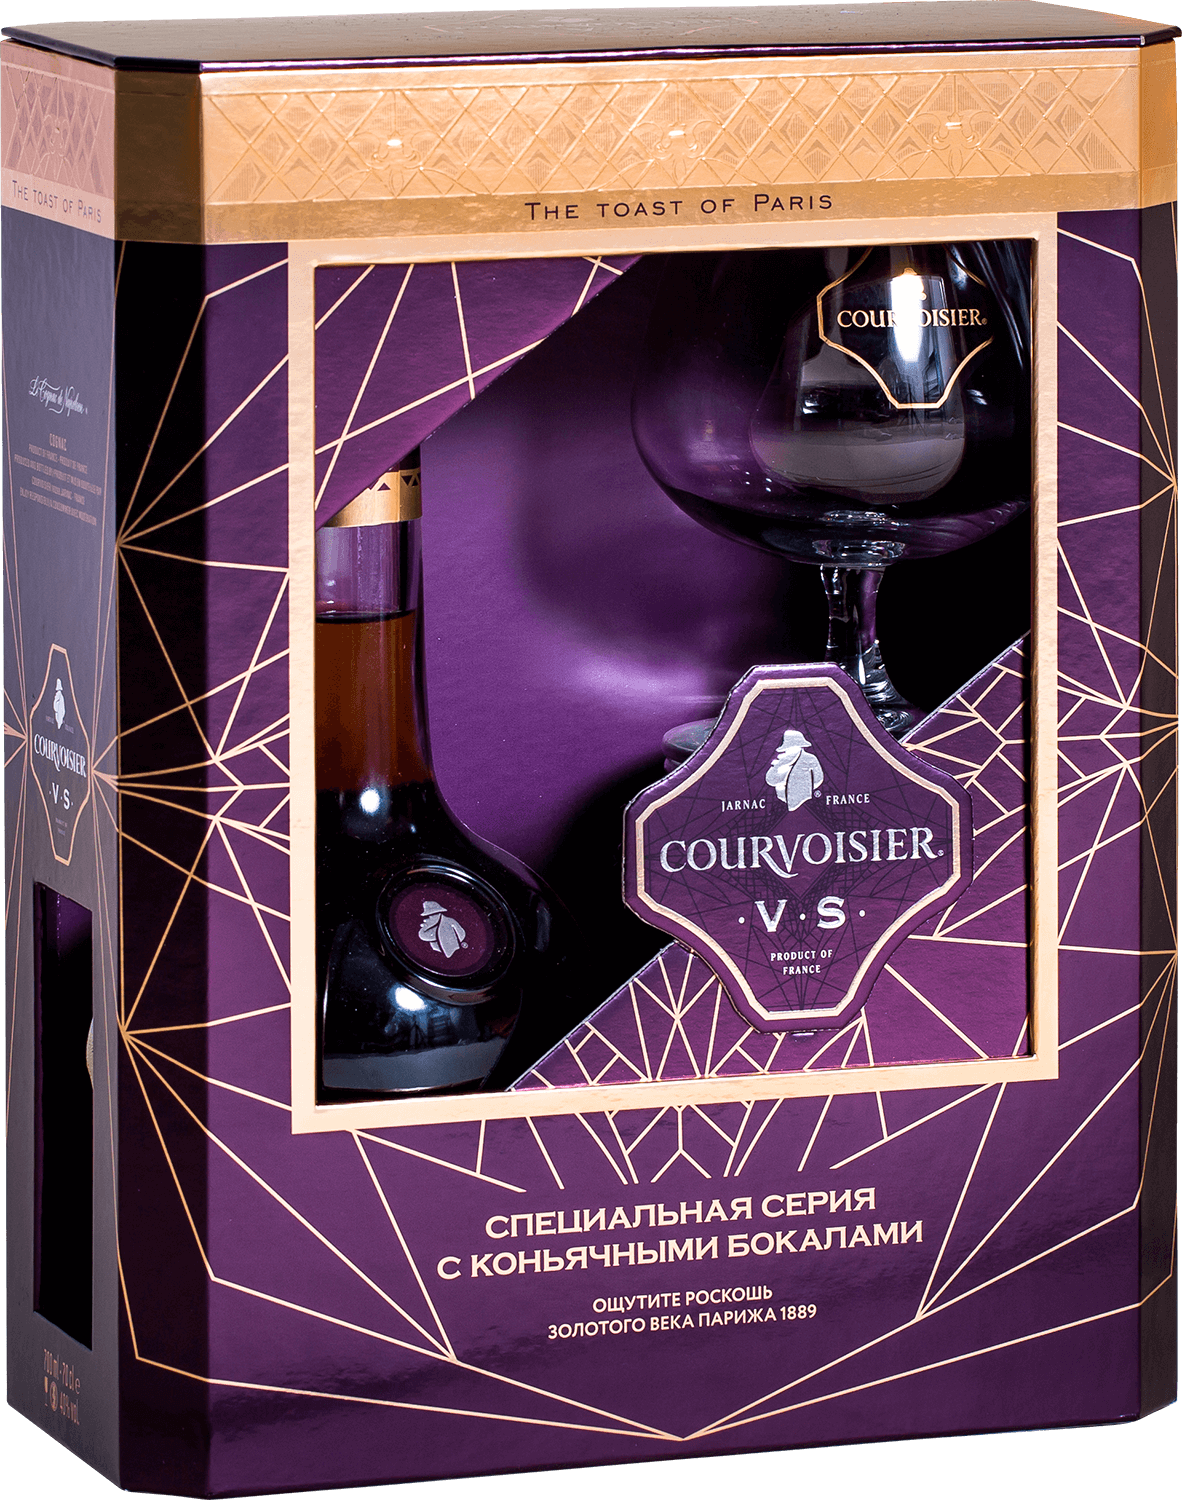 Courvoisier VS in gift box with two glasses courvoisier 21 y o gift box